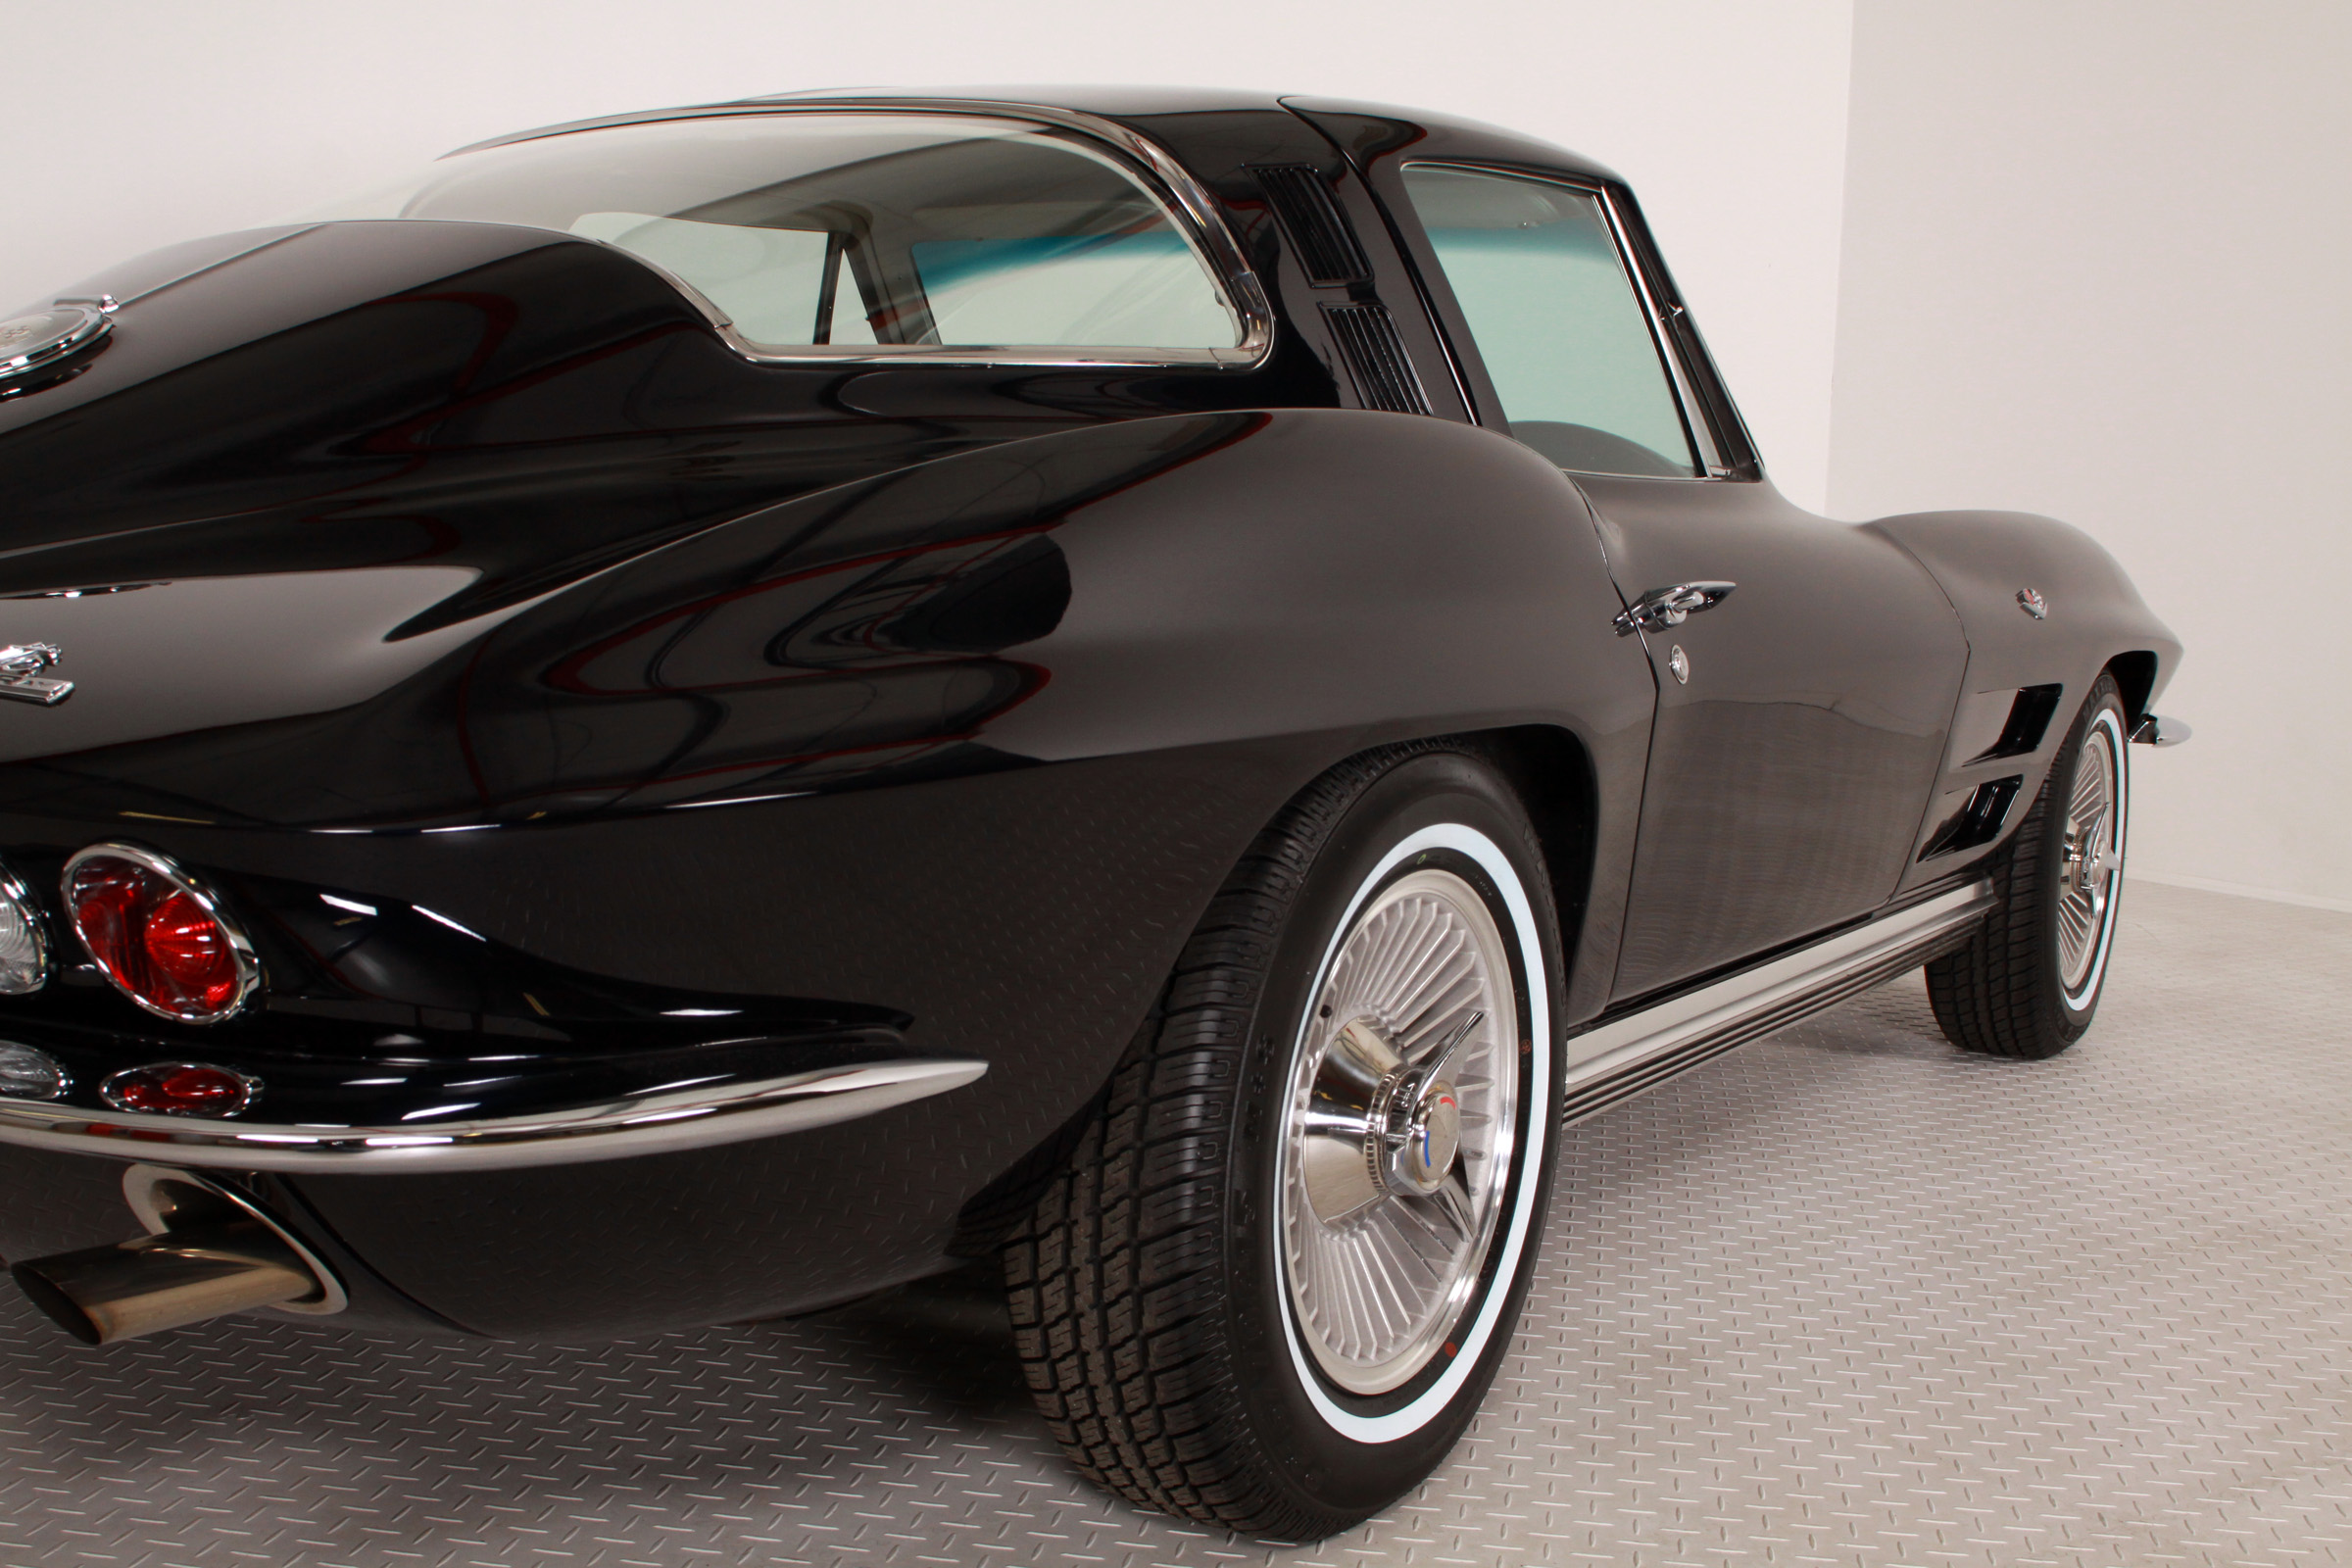 Chevrolet - Corvette C2 Sting Ray C2 Coupe -Matching# -365Hp